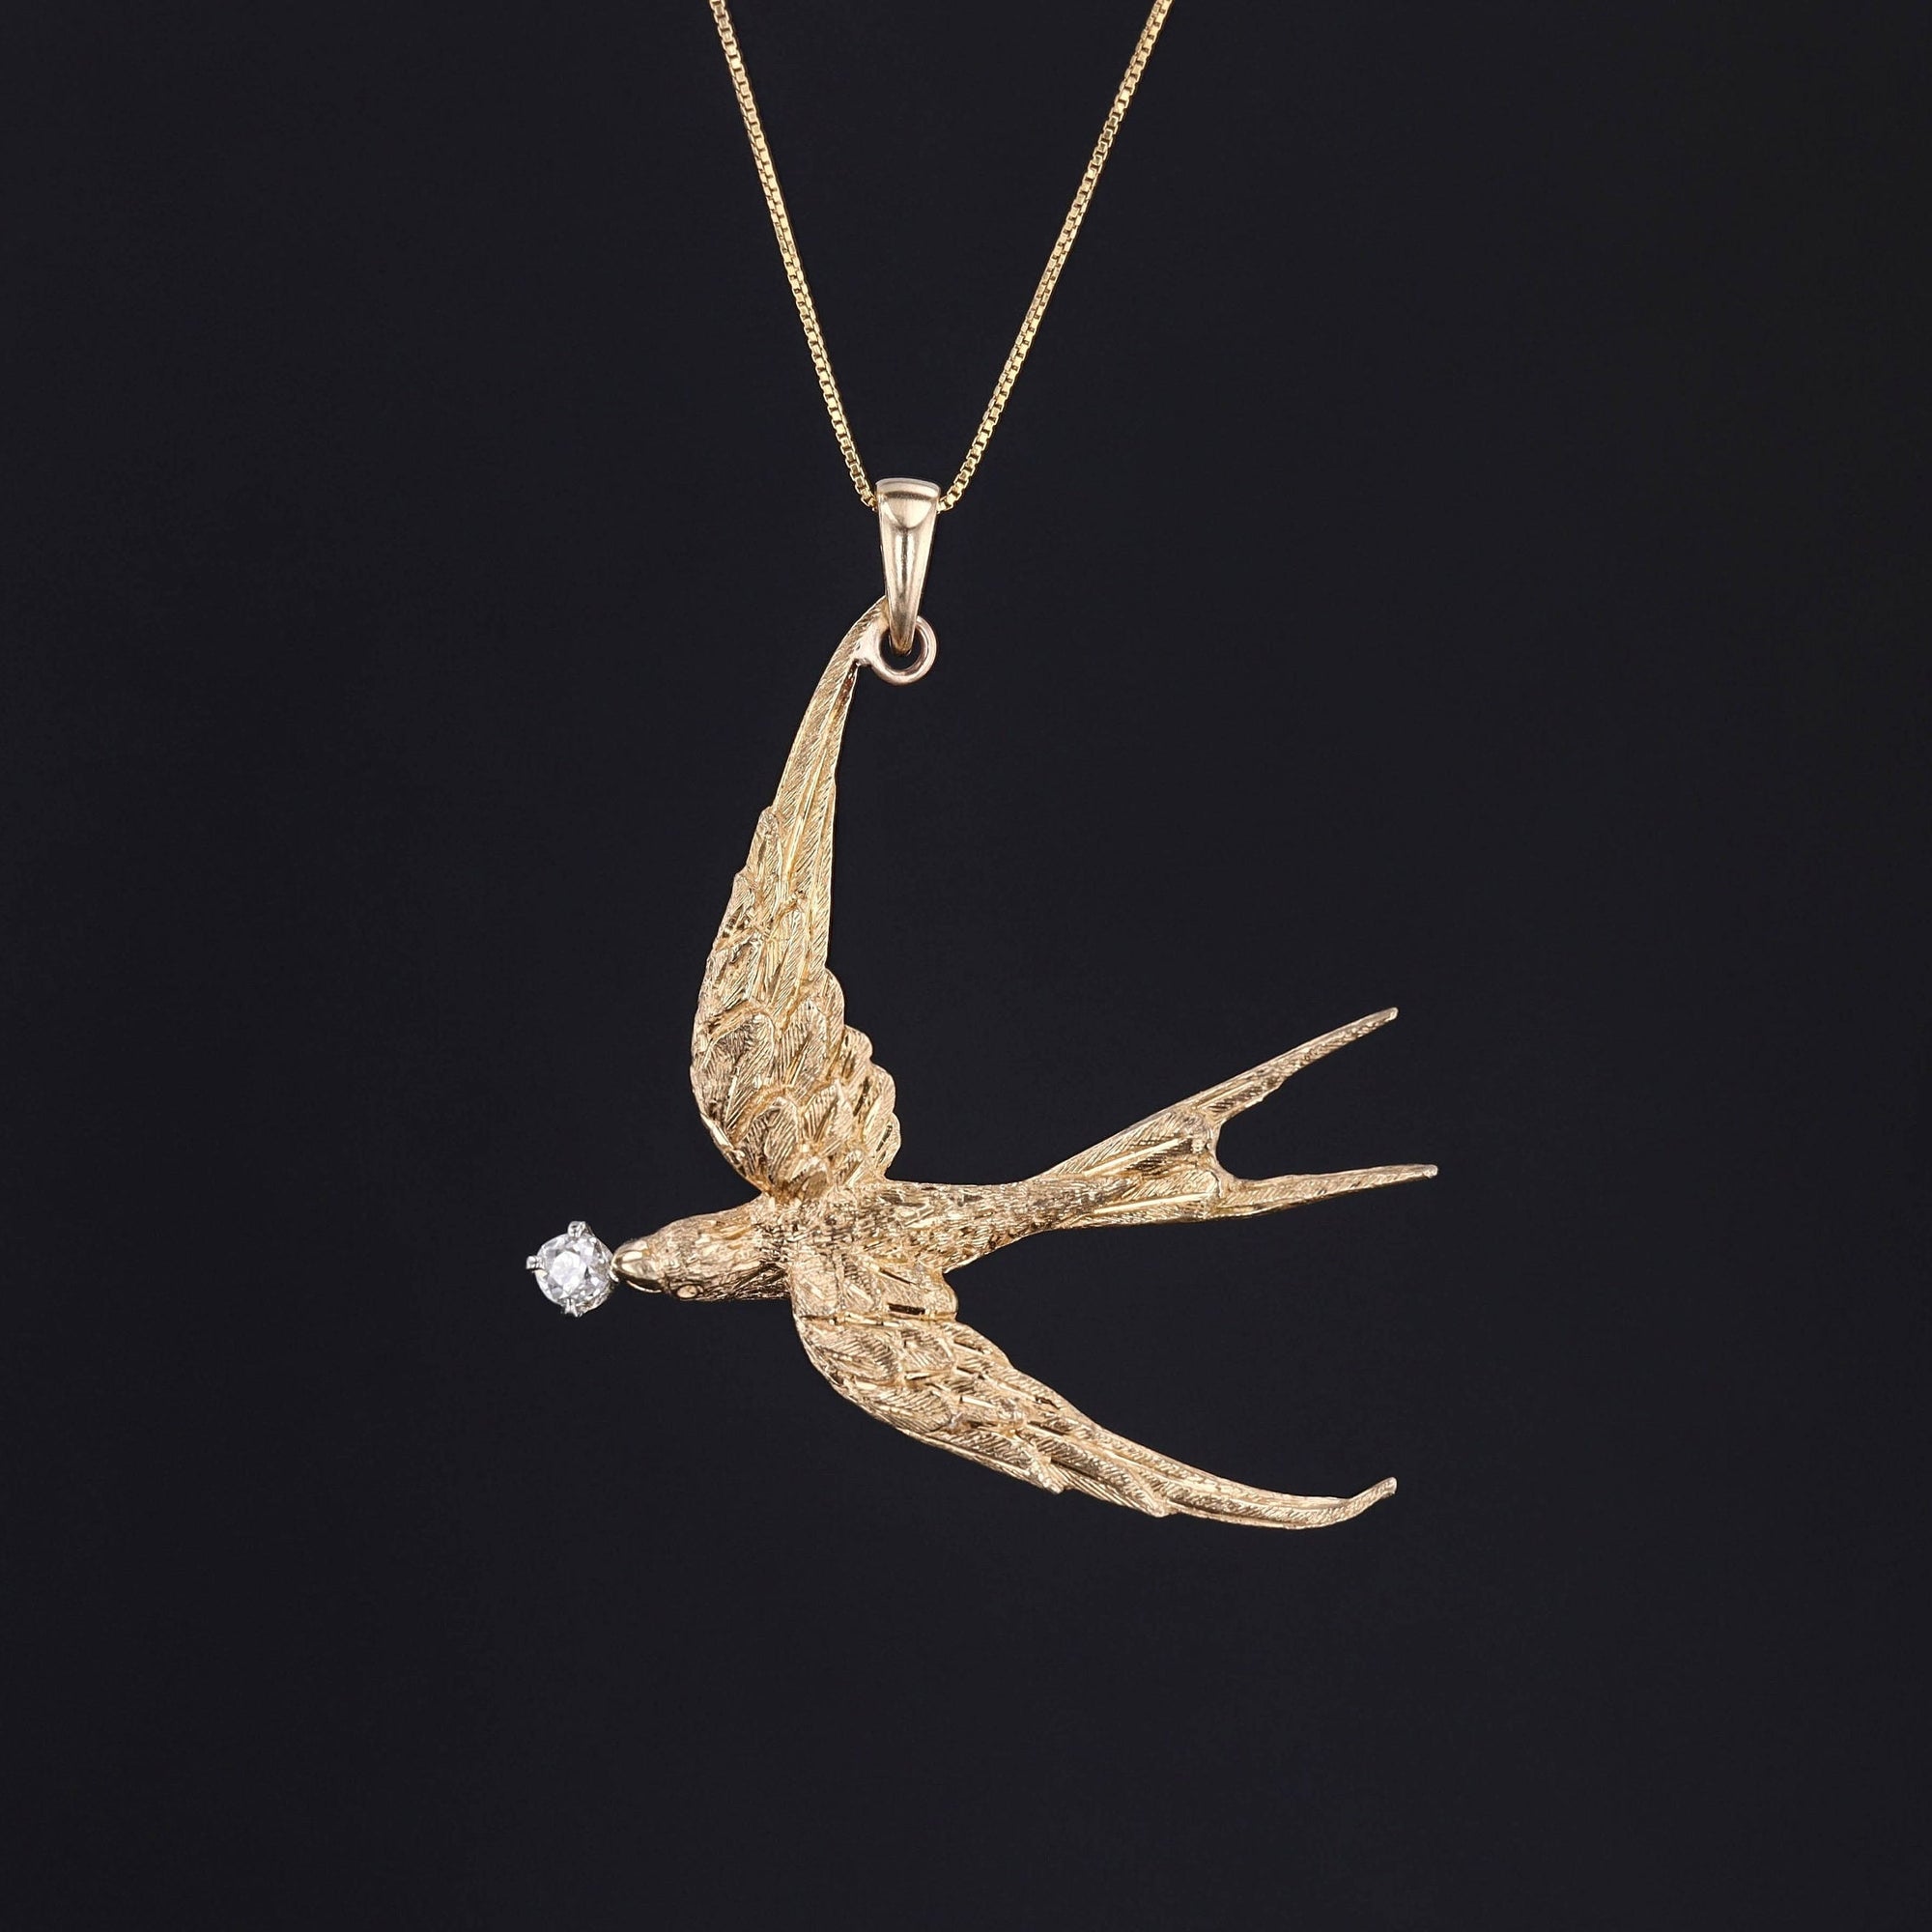 Antique 14k Gold and Diamond Swallow Bird Pendant on Optional 14k Gold Necklace